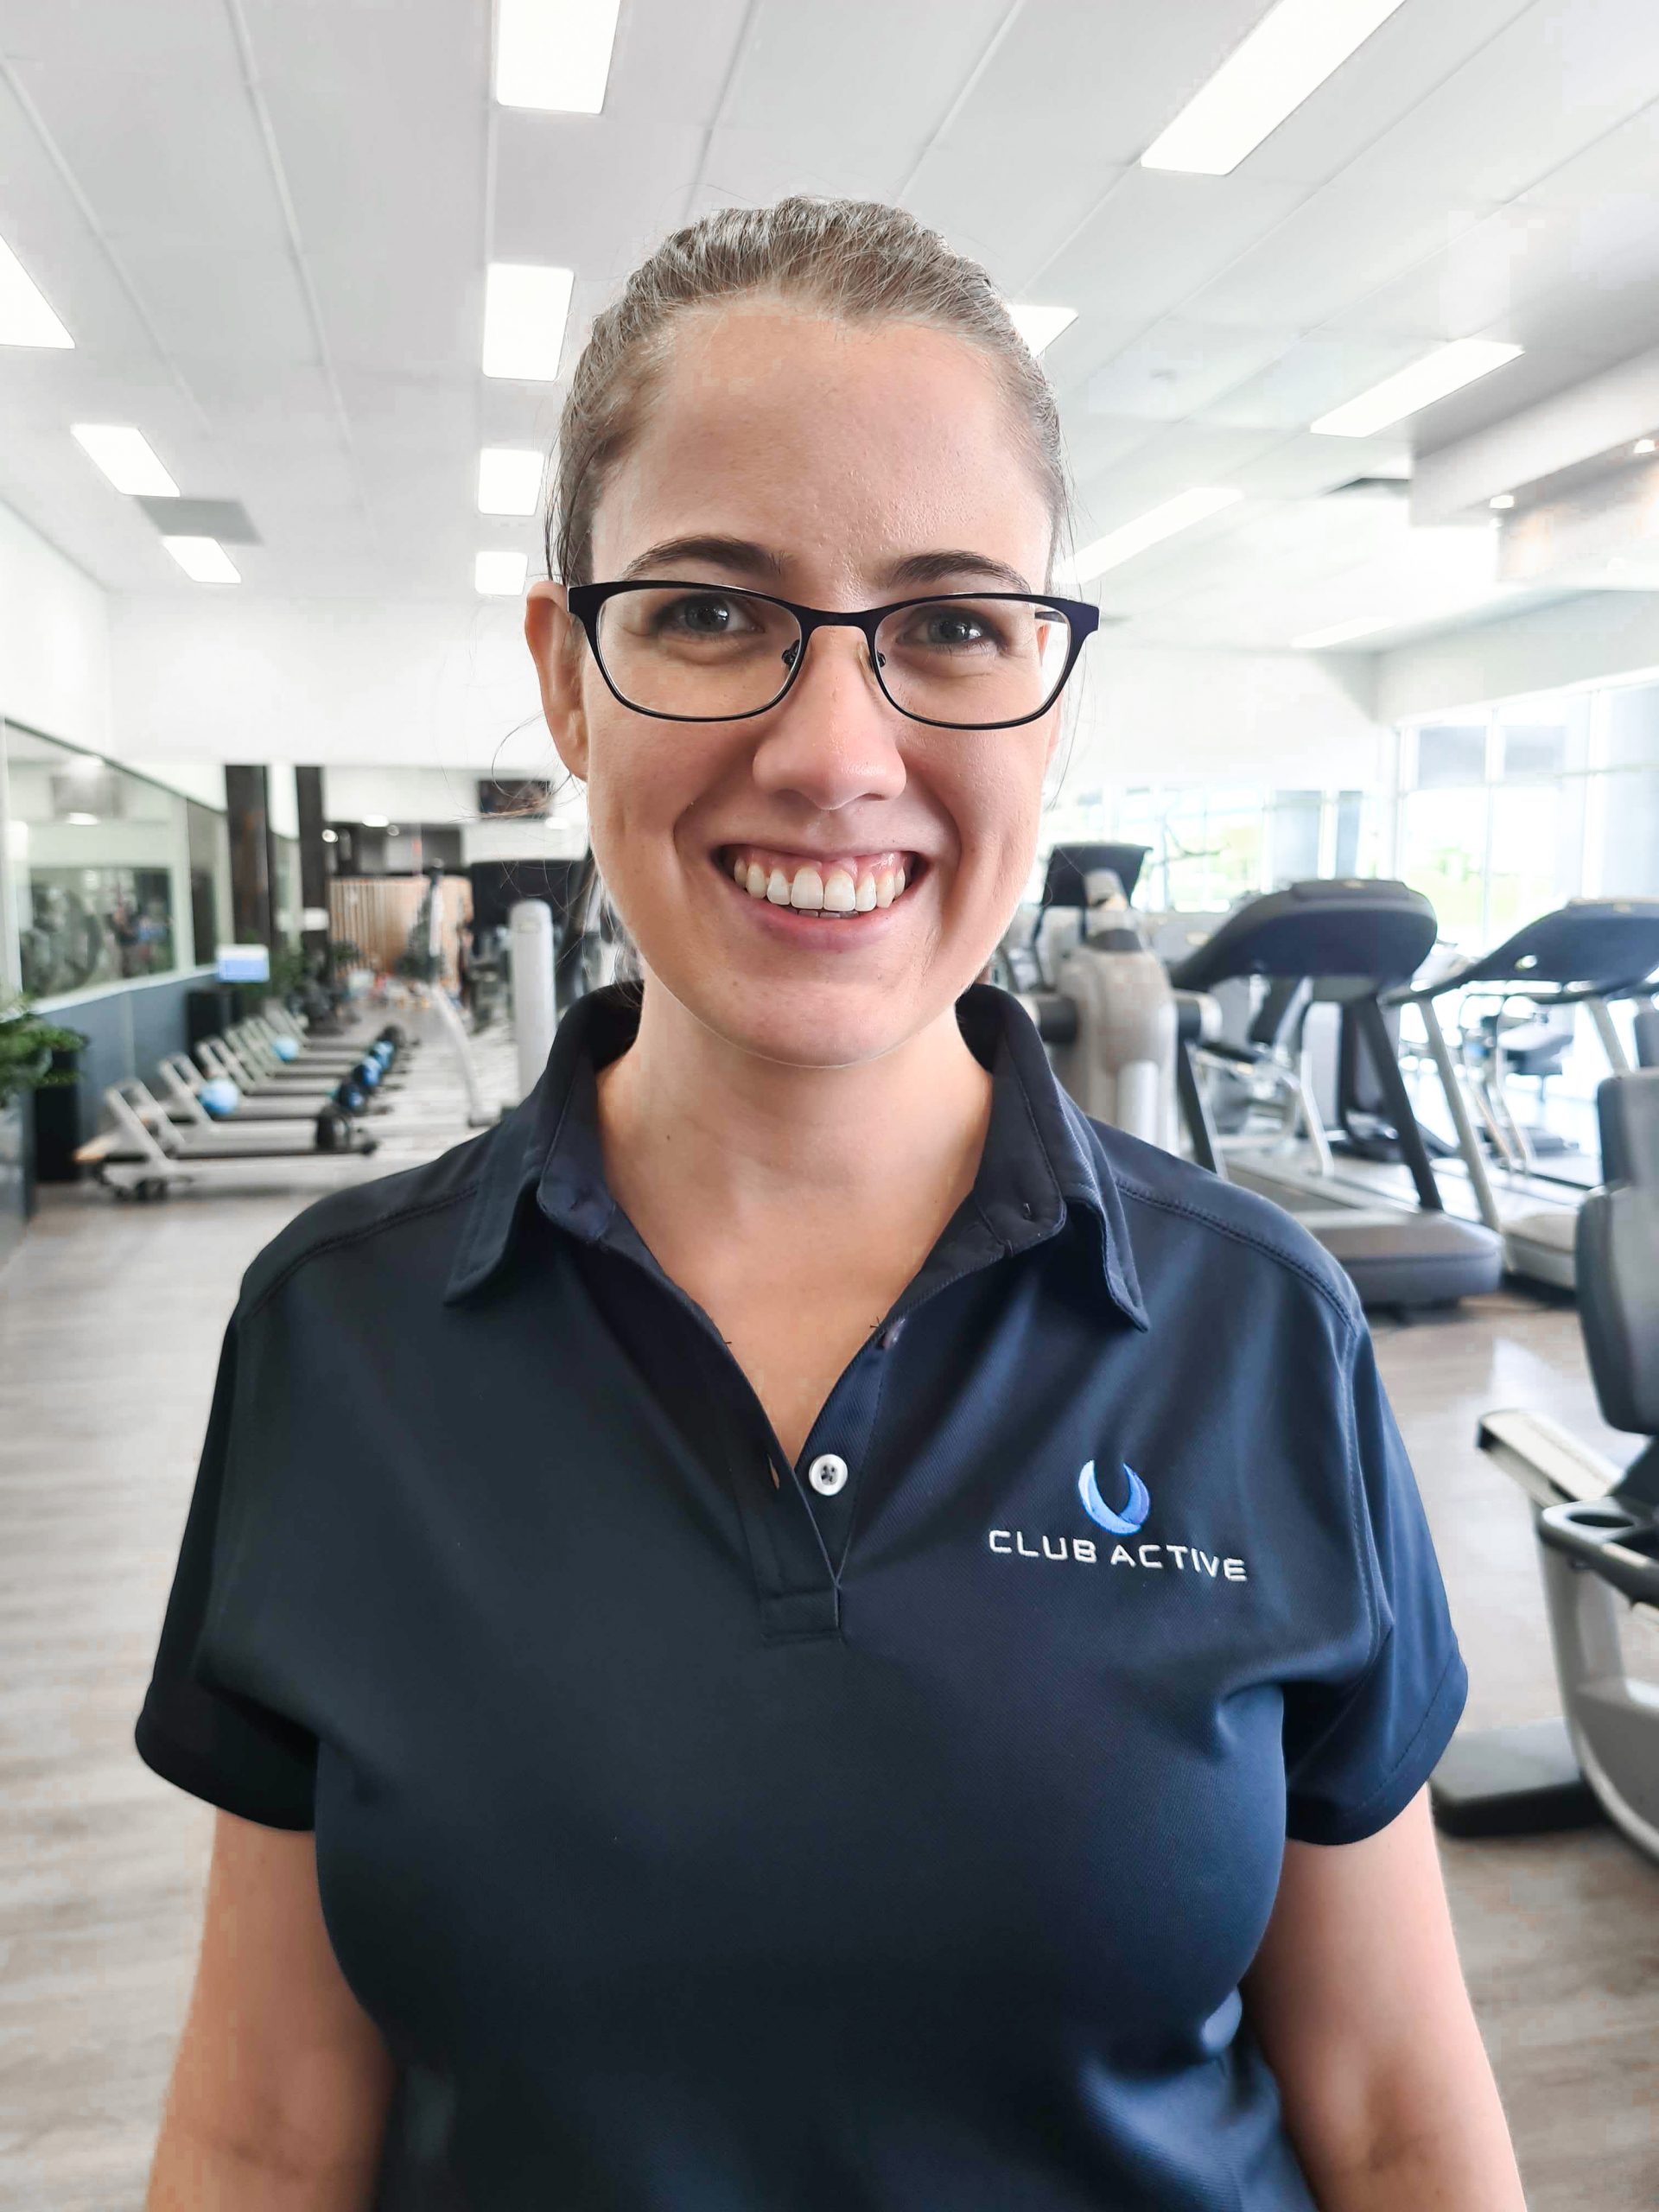 Meet Club Active Castle Hill Club Manager, Heather Martin